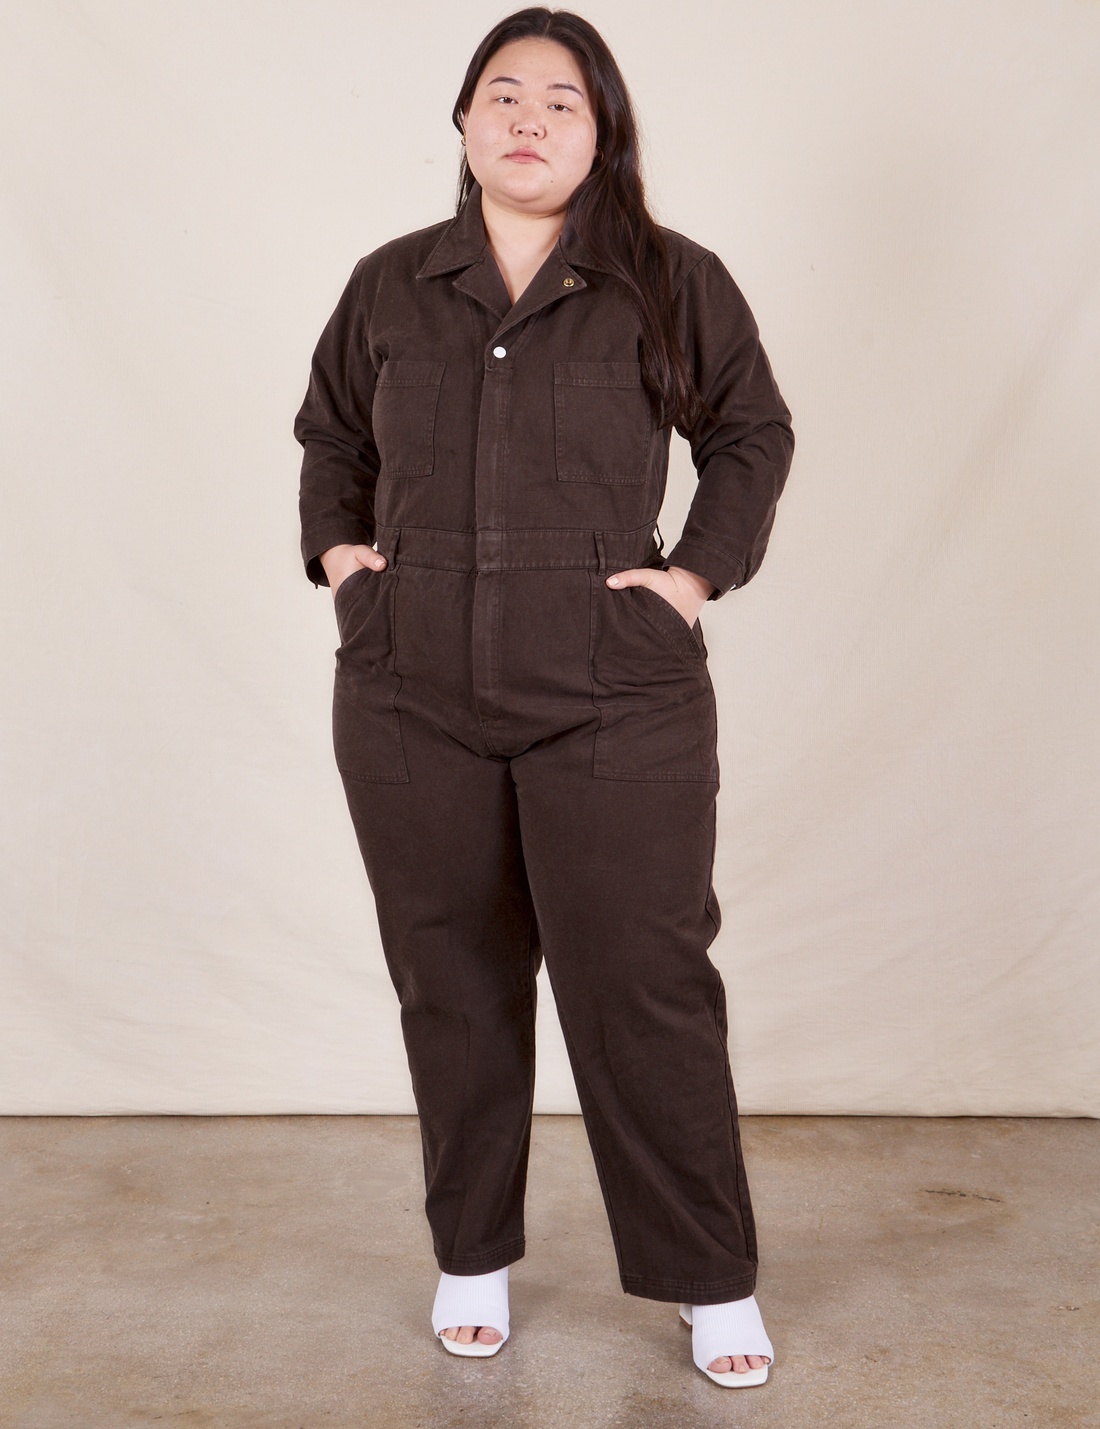 Ashley is wearing Everyday Jumpsuit in Espresso Brown